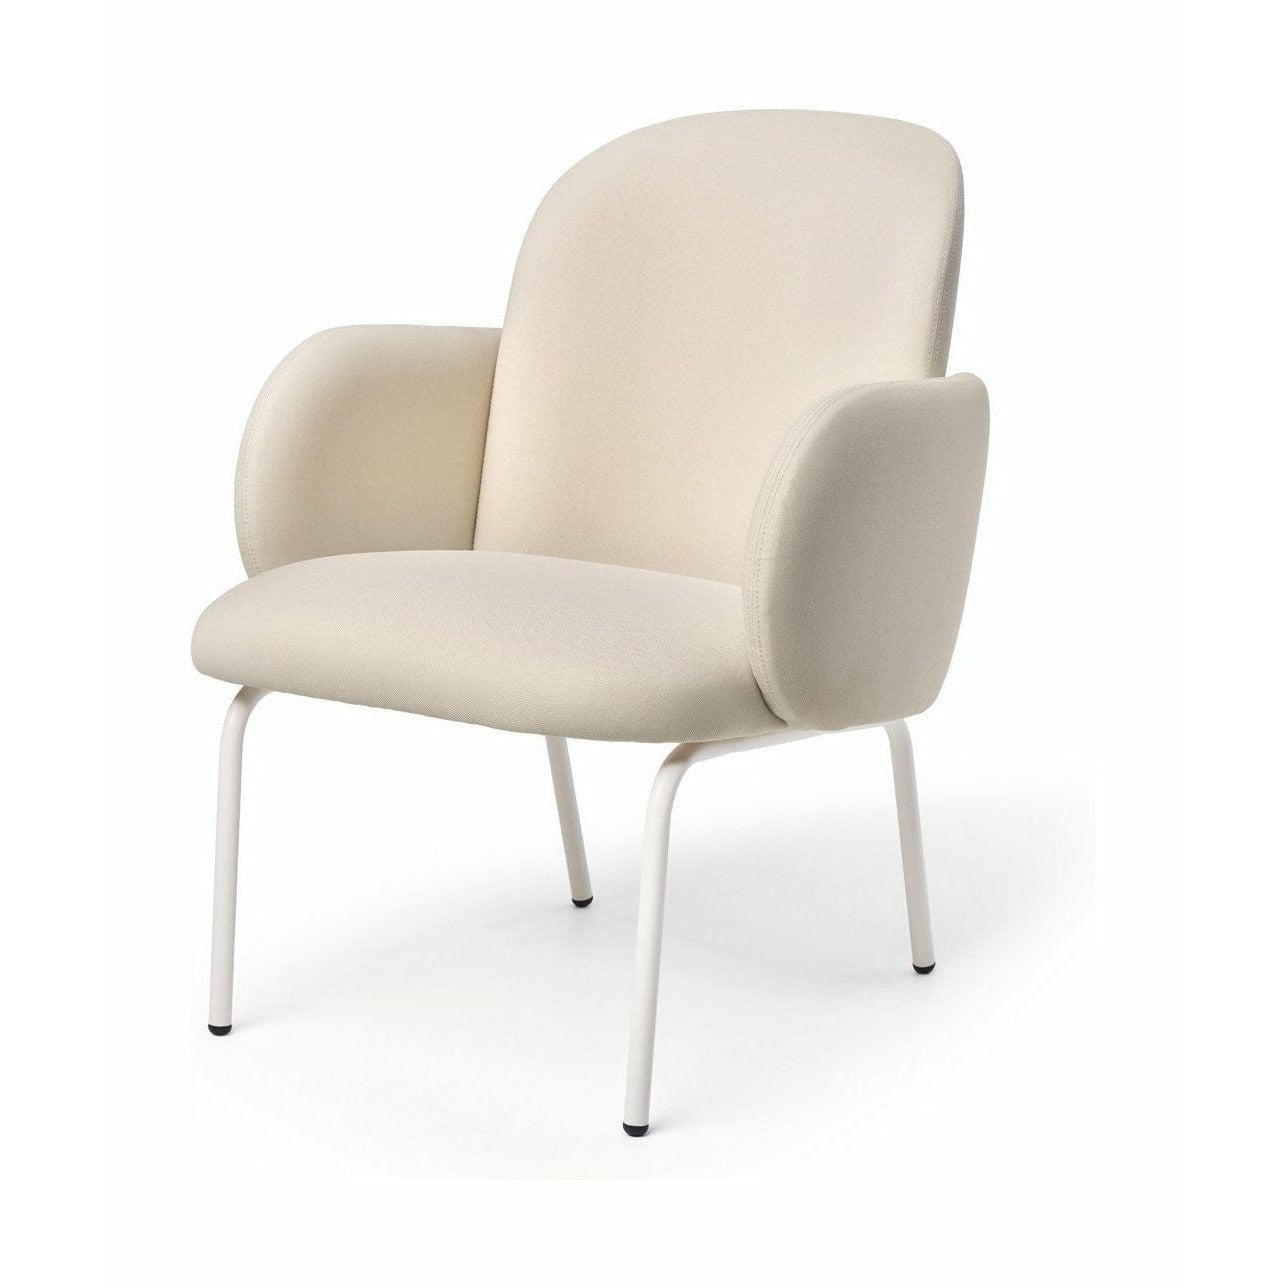 Puik Dost Lounge Chair Steel, Ivory/Cream